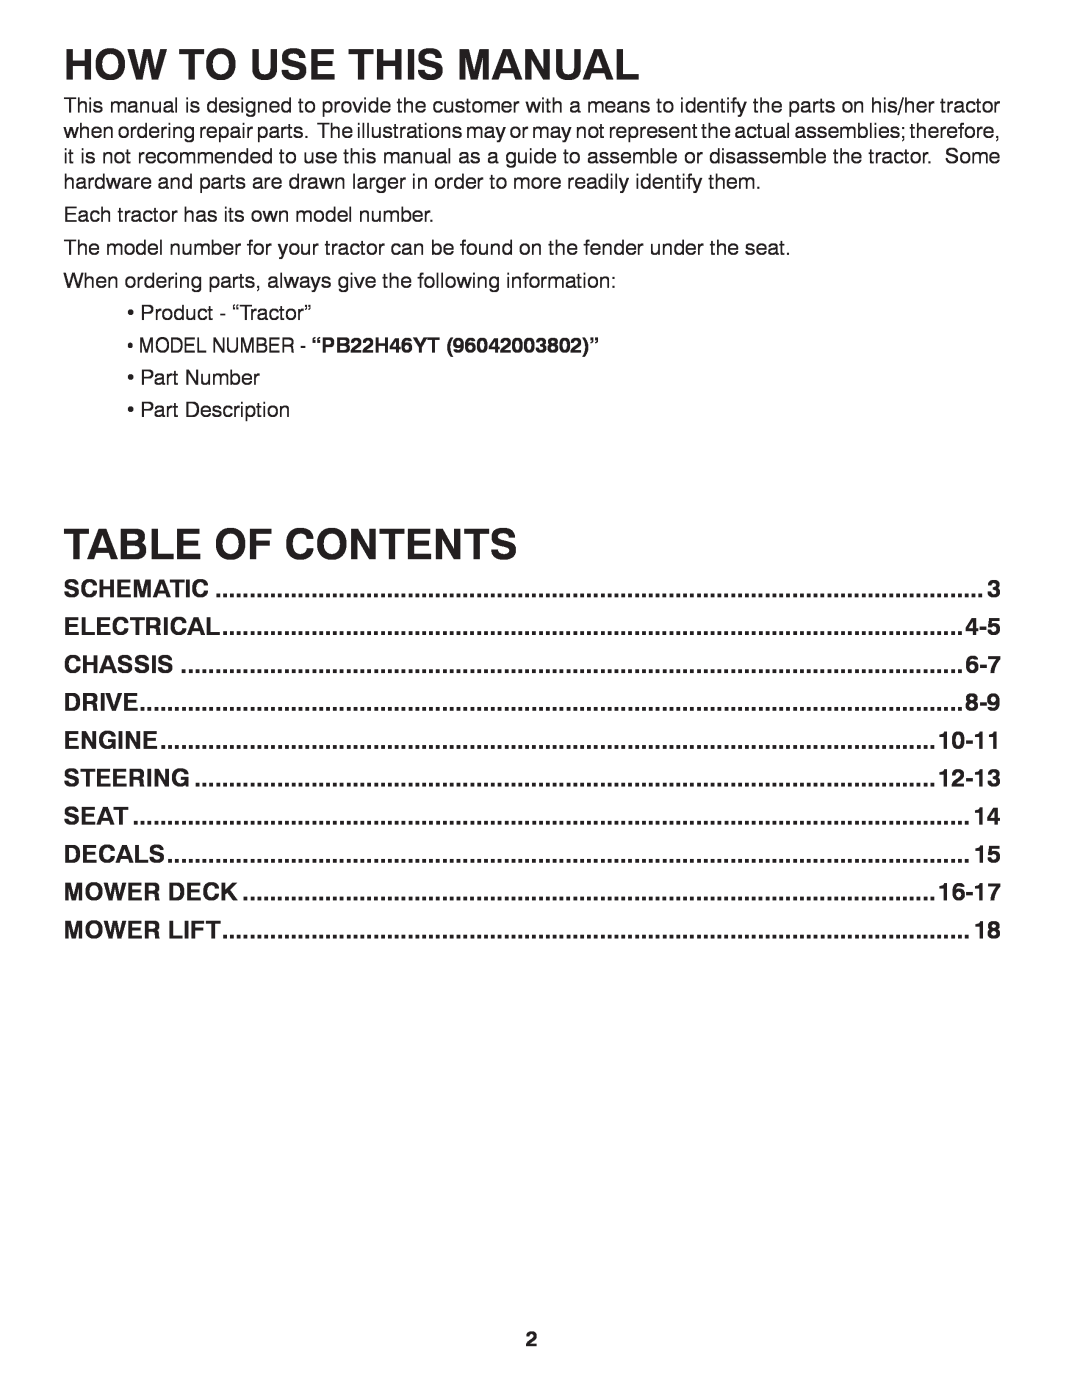 Poulan 96042003802, 960 42 00-38 How To Use This Manual, Table Of Contents, Chassis, Drive, Engine, Steering, Mower Deck 